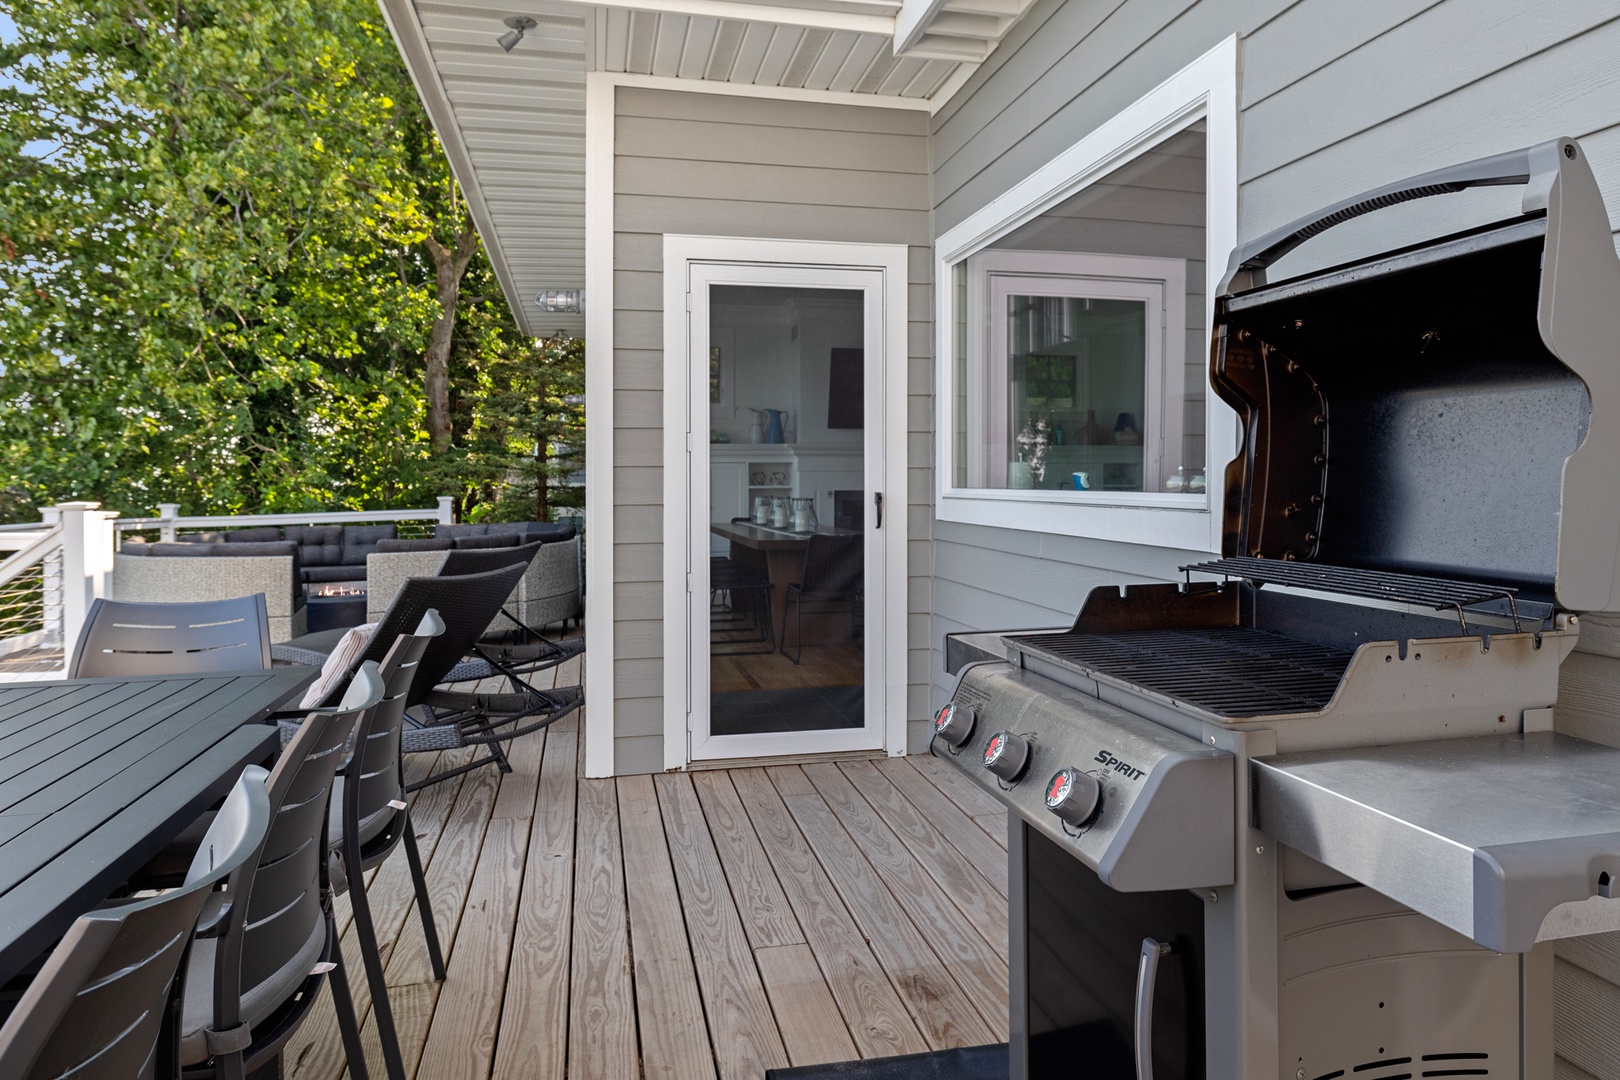 We do have the perfect spot to grill from.